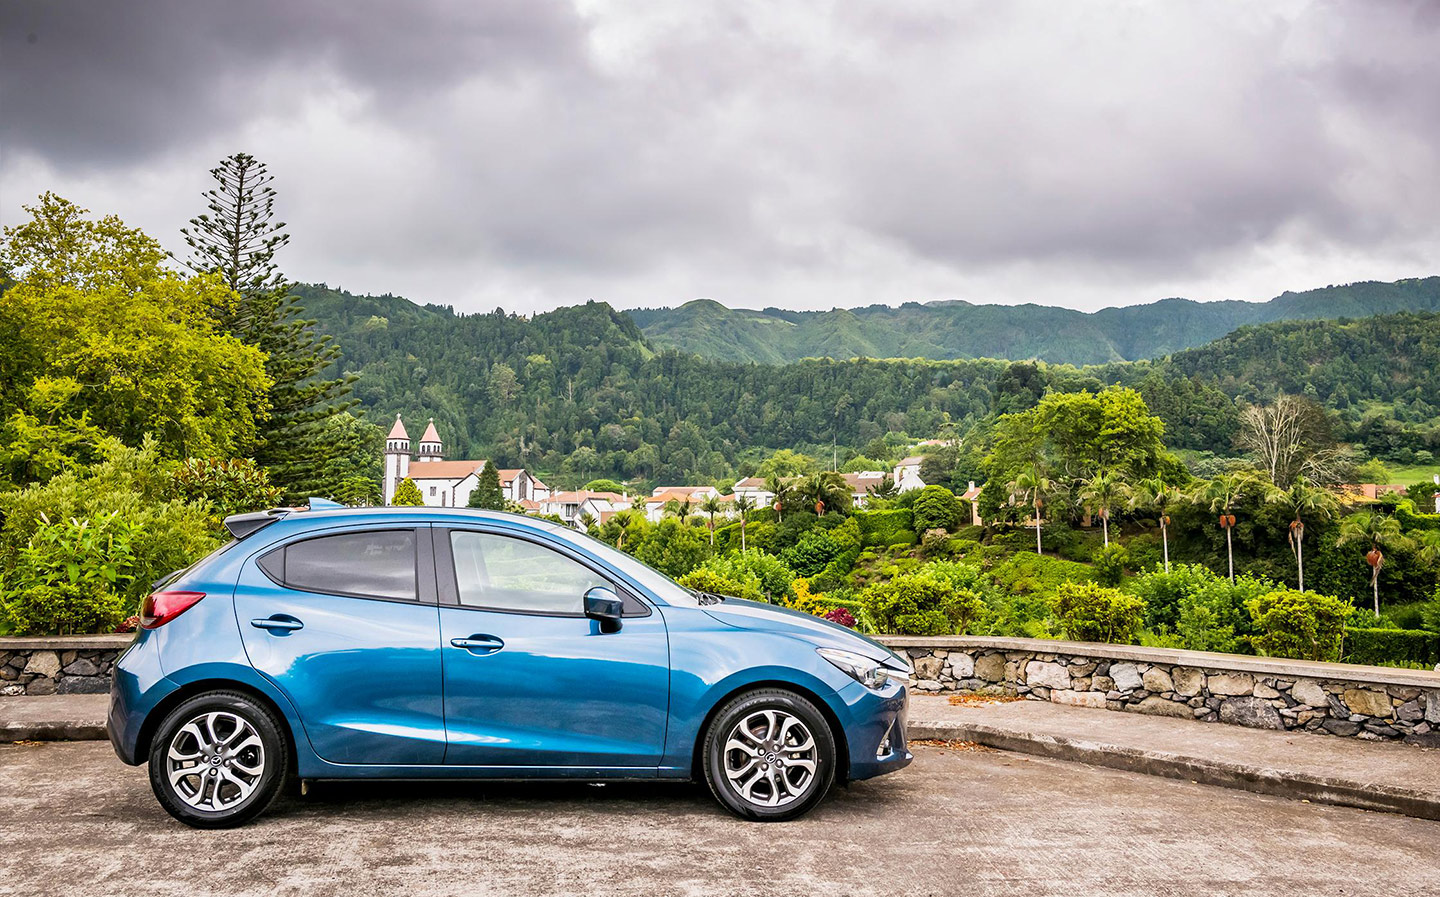 Mazda Great Drives: The island of Sao Miguel in the Azores